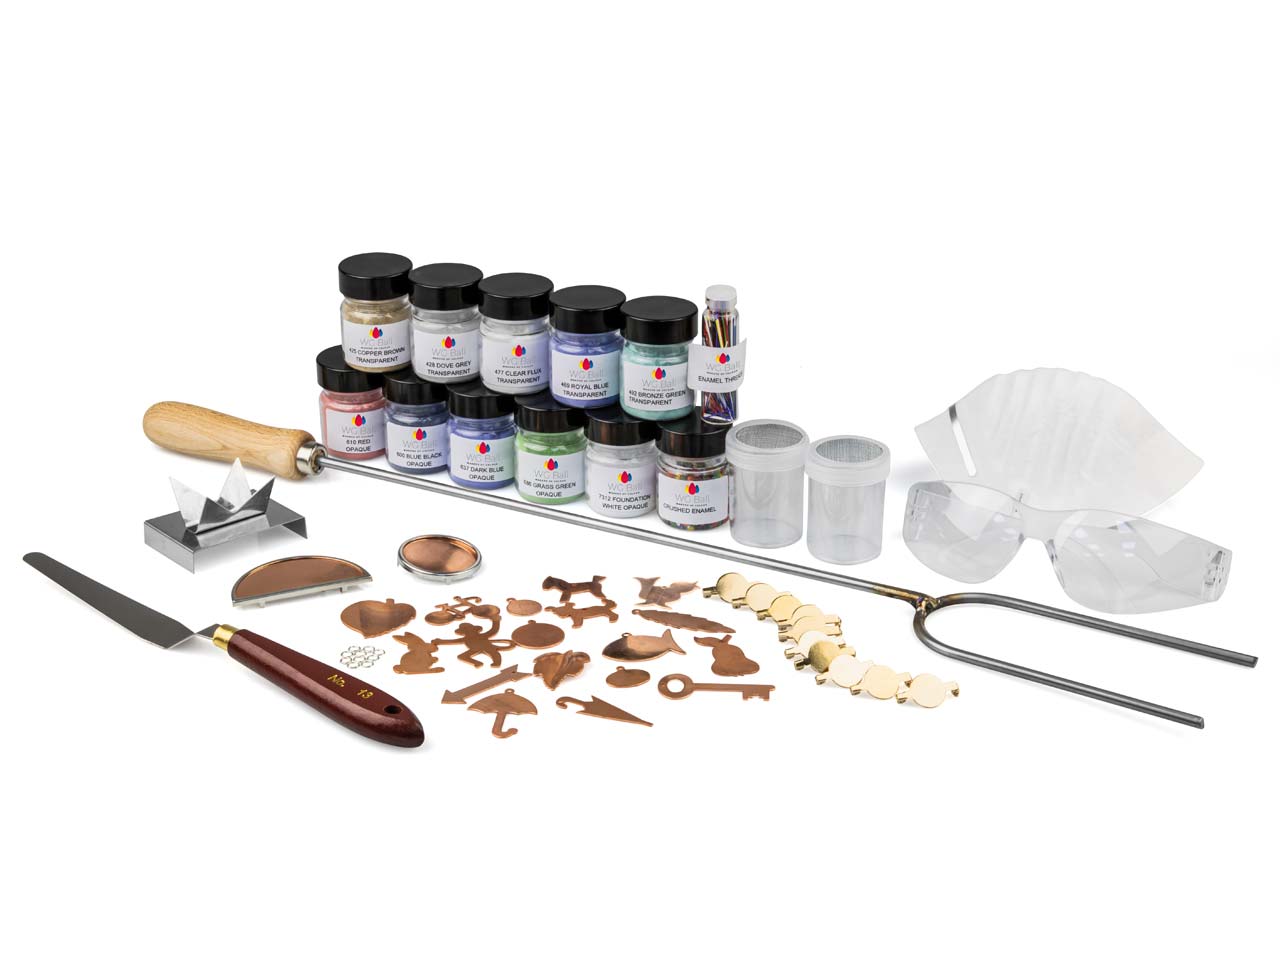 WG Ball Enamelling Super Starter Kit Questions & Answers